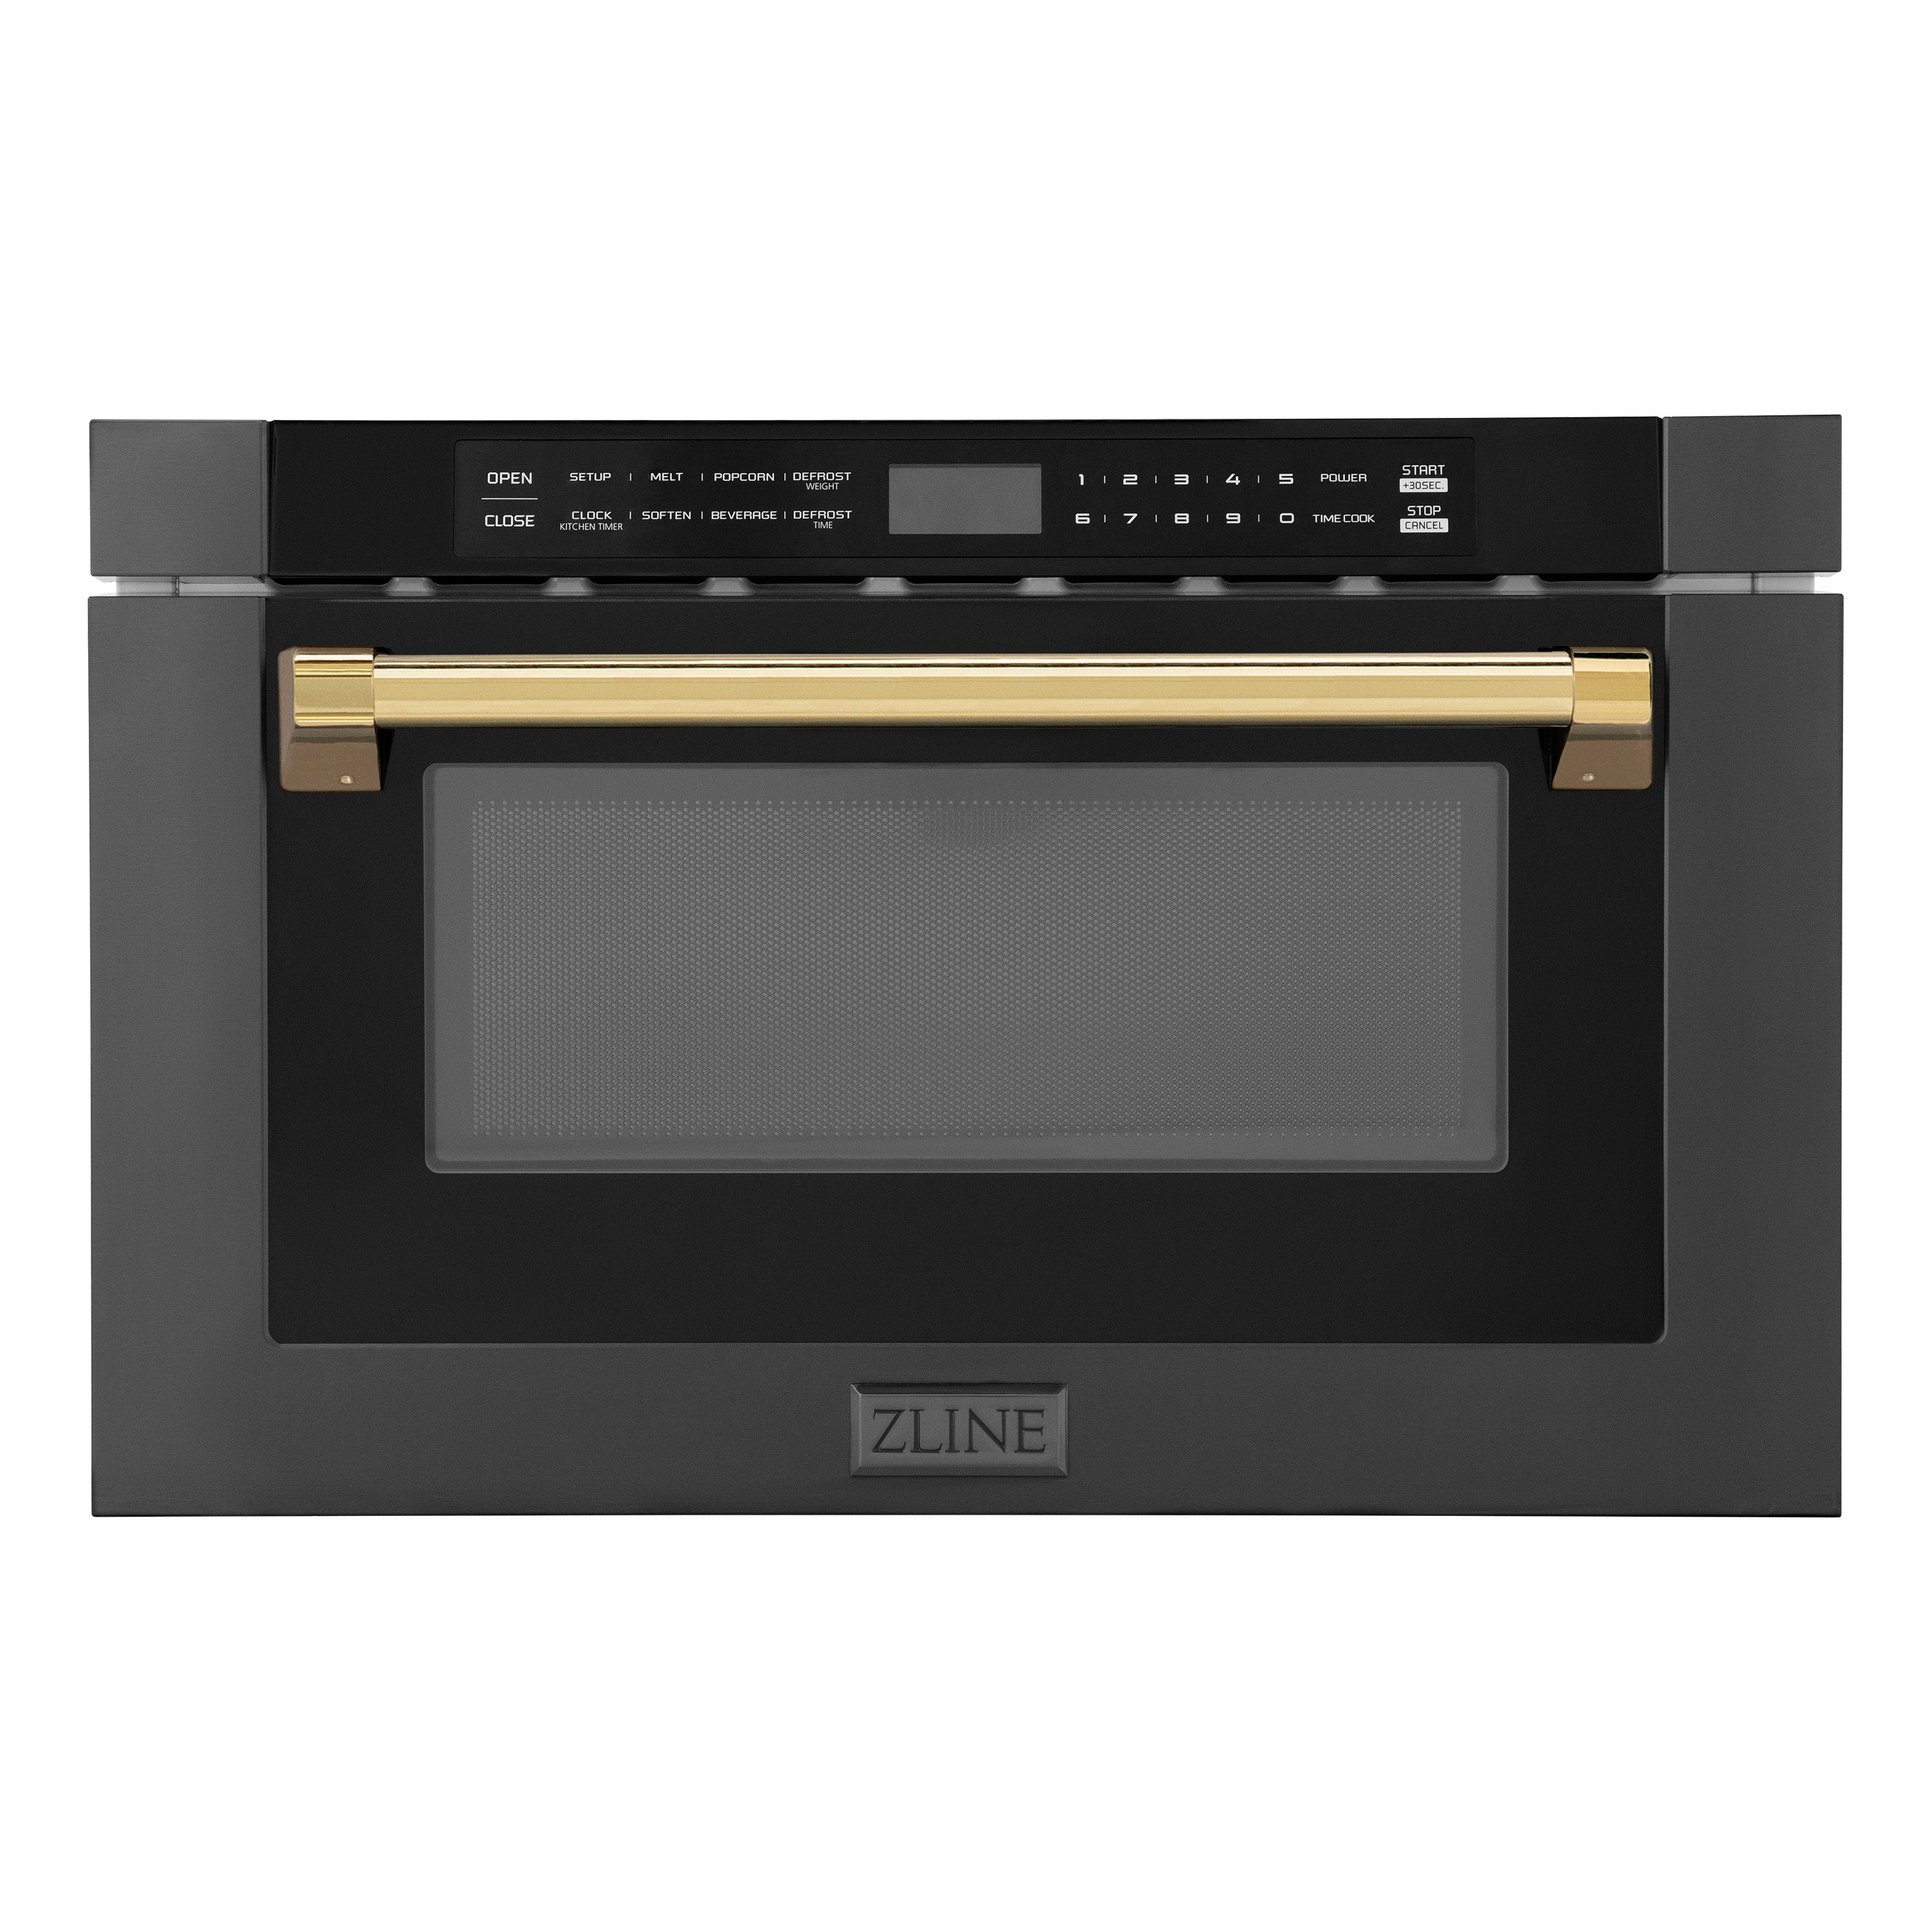 ZLINE Autograph Edition 24" 1.2 cu. ft. Built-in Microwave Drawer in Black Stainless Steel and Polished Polished Gold Accents